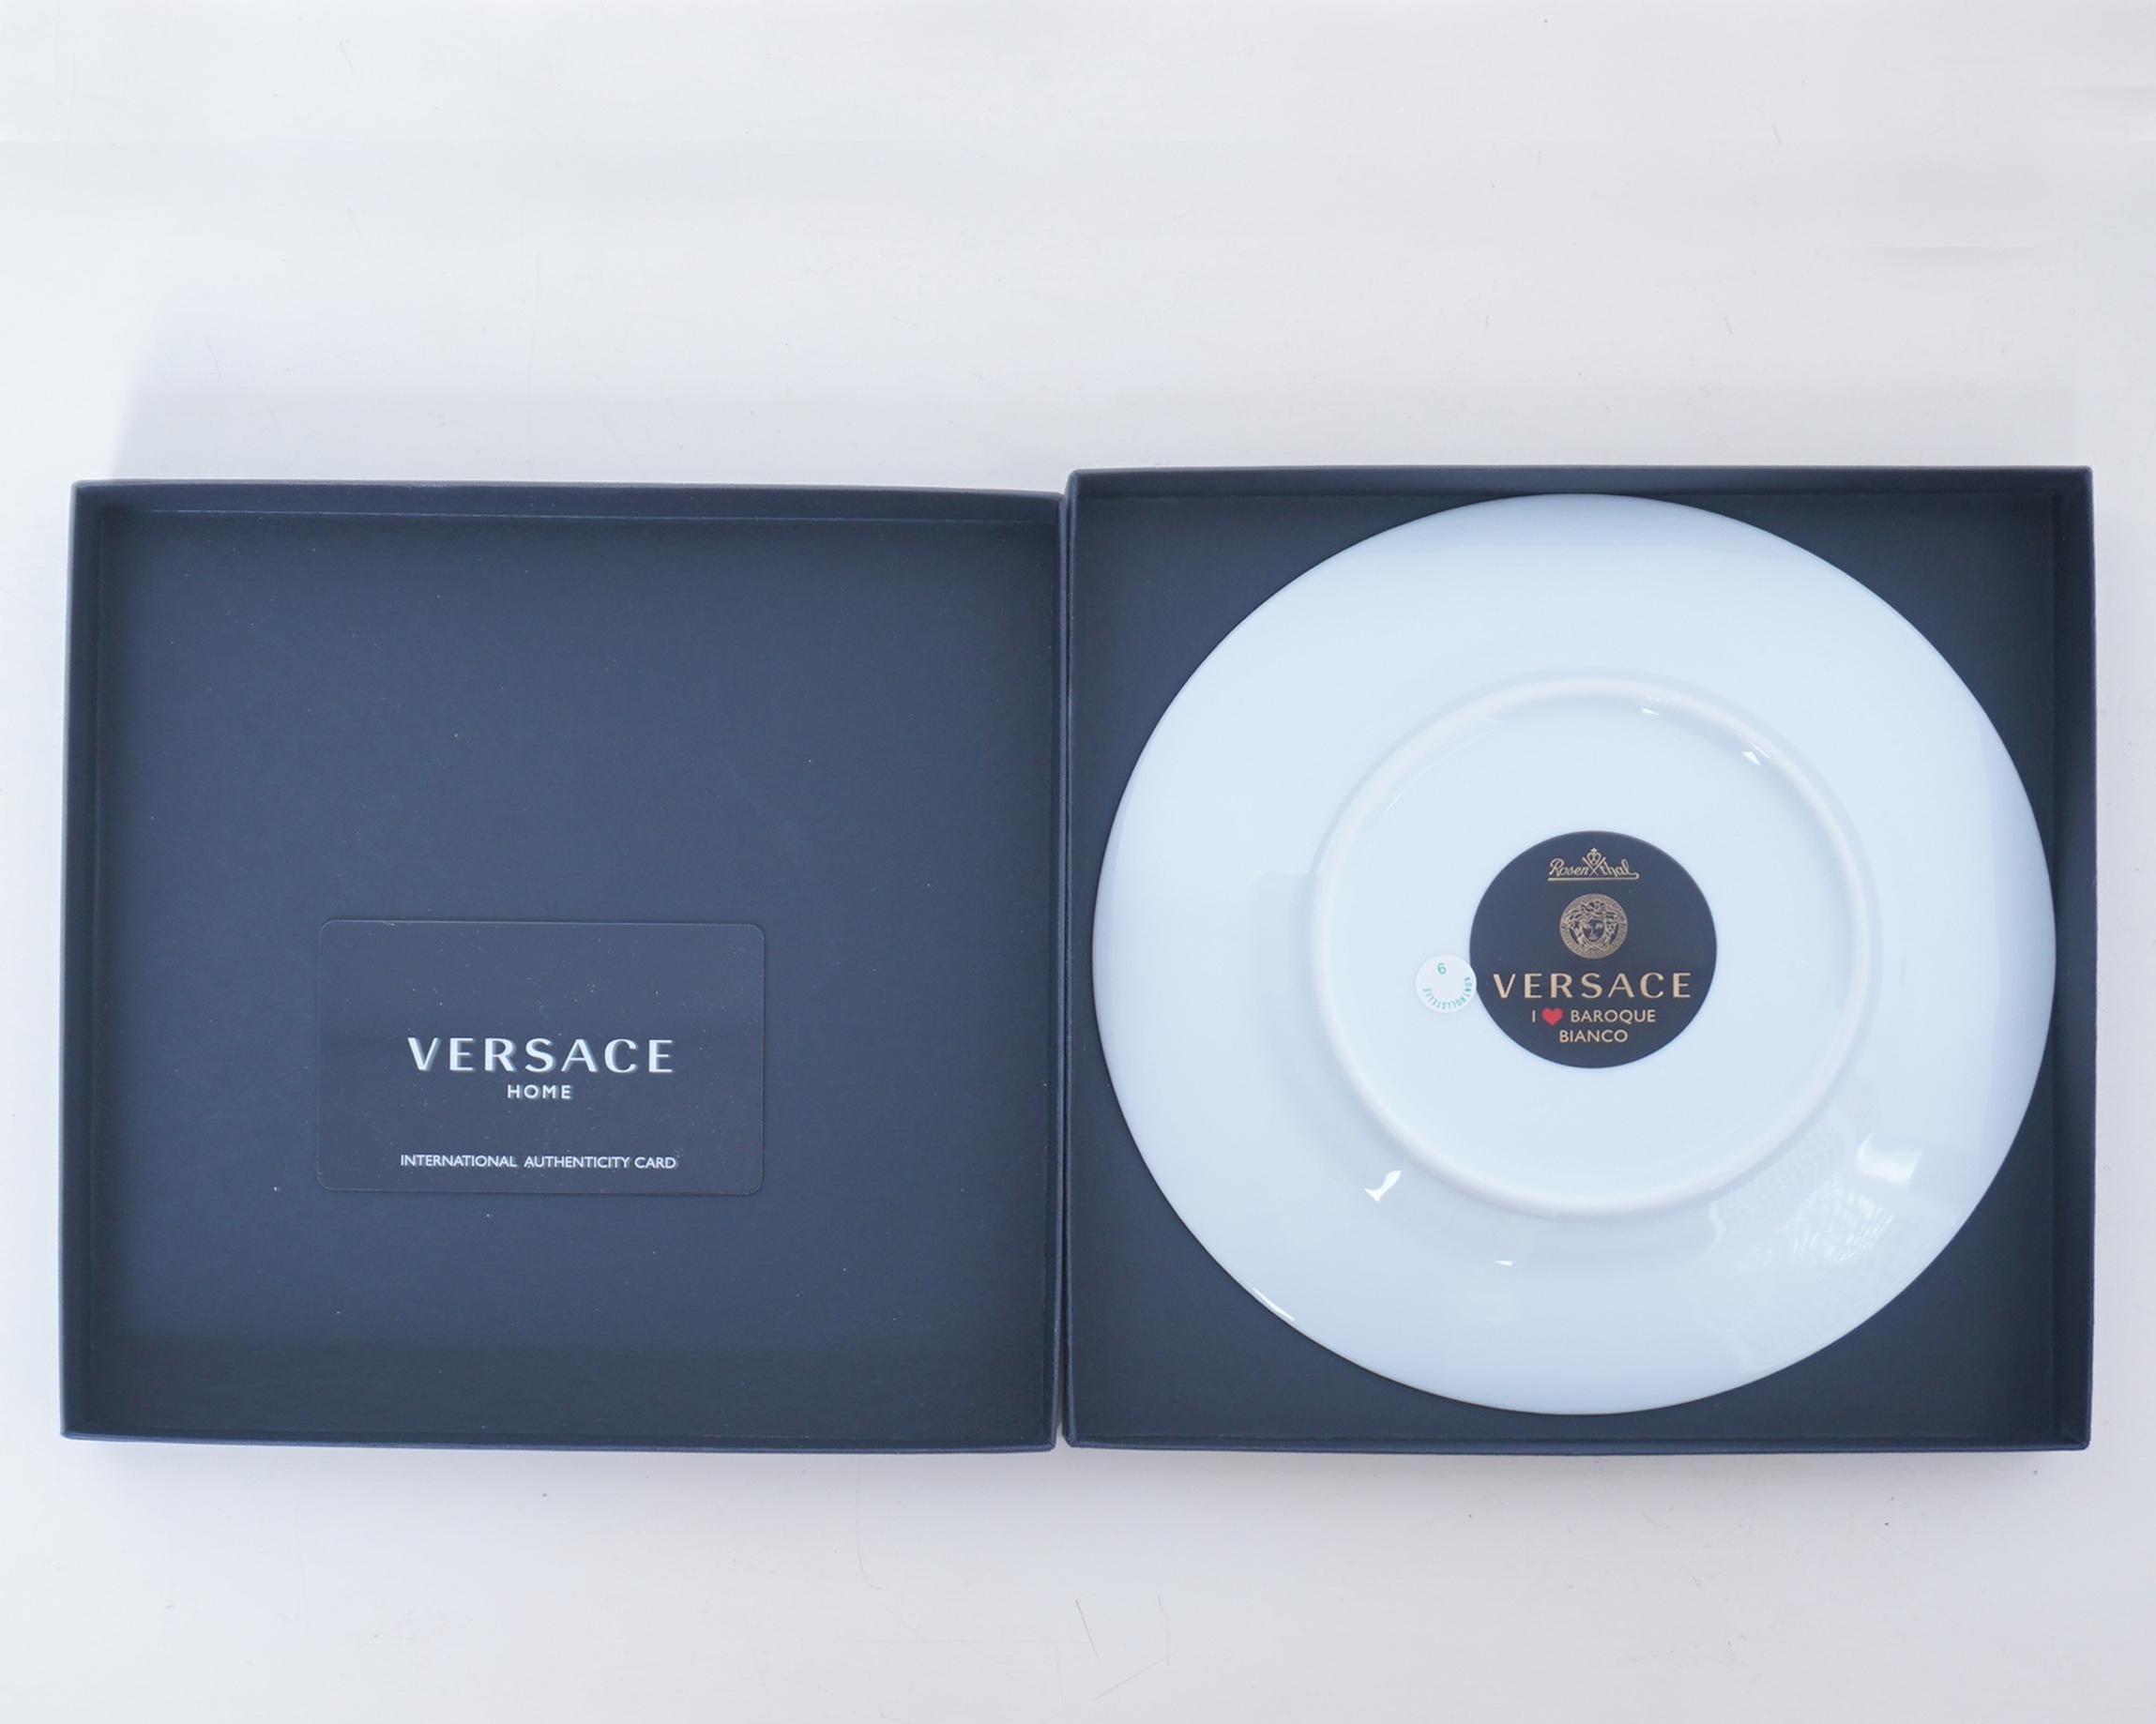 Porcelain 1990s Baroque Bianco Plate by VERSACE for Rosenthal NOS New in Box